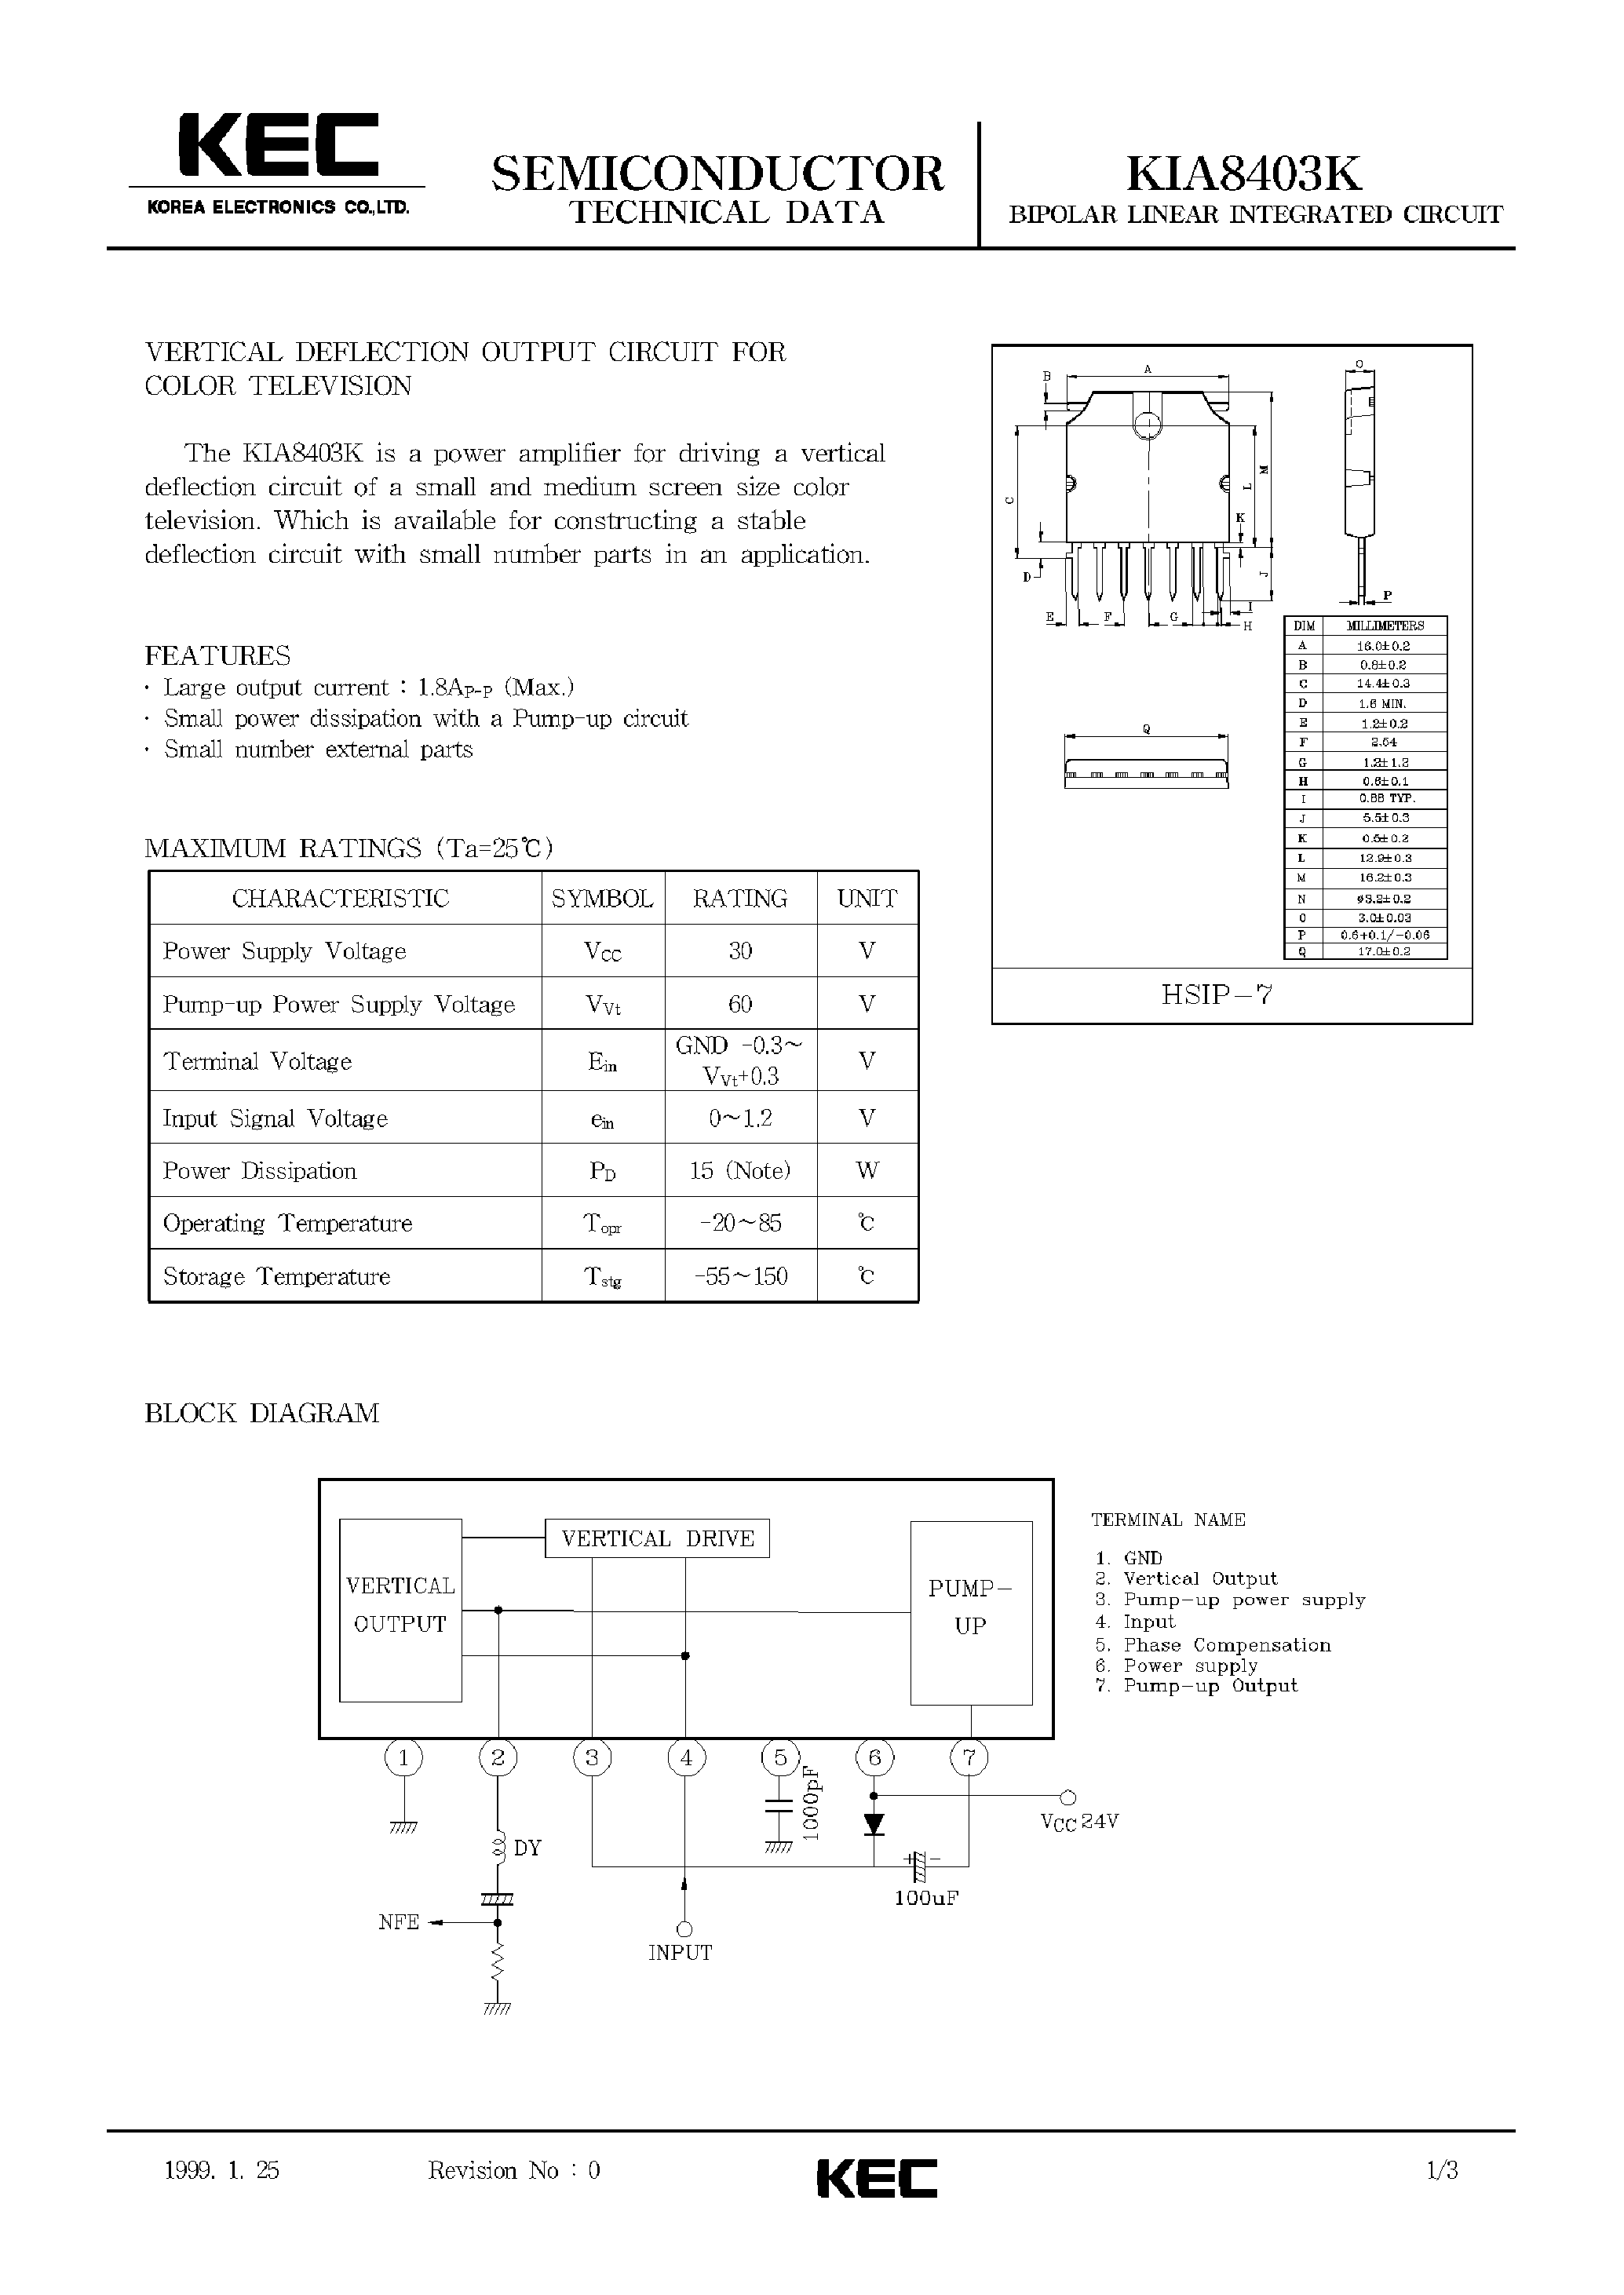 Datasheet KIA8403K - BIPOLAR LINEAR INTEGRATED CIRCUIT (VERTICAL DEFLECTION OUTPUT CIRCUIT FOR COLOR TELEVISION) page 1